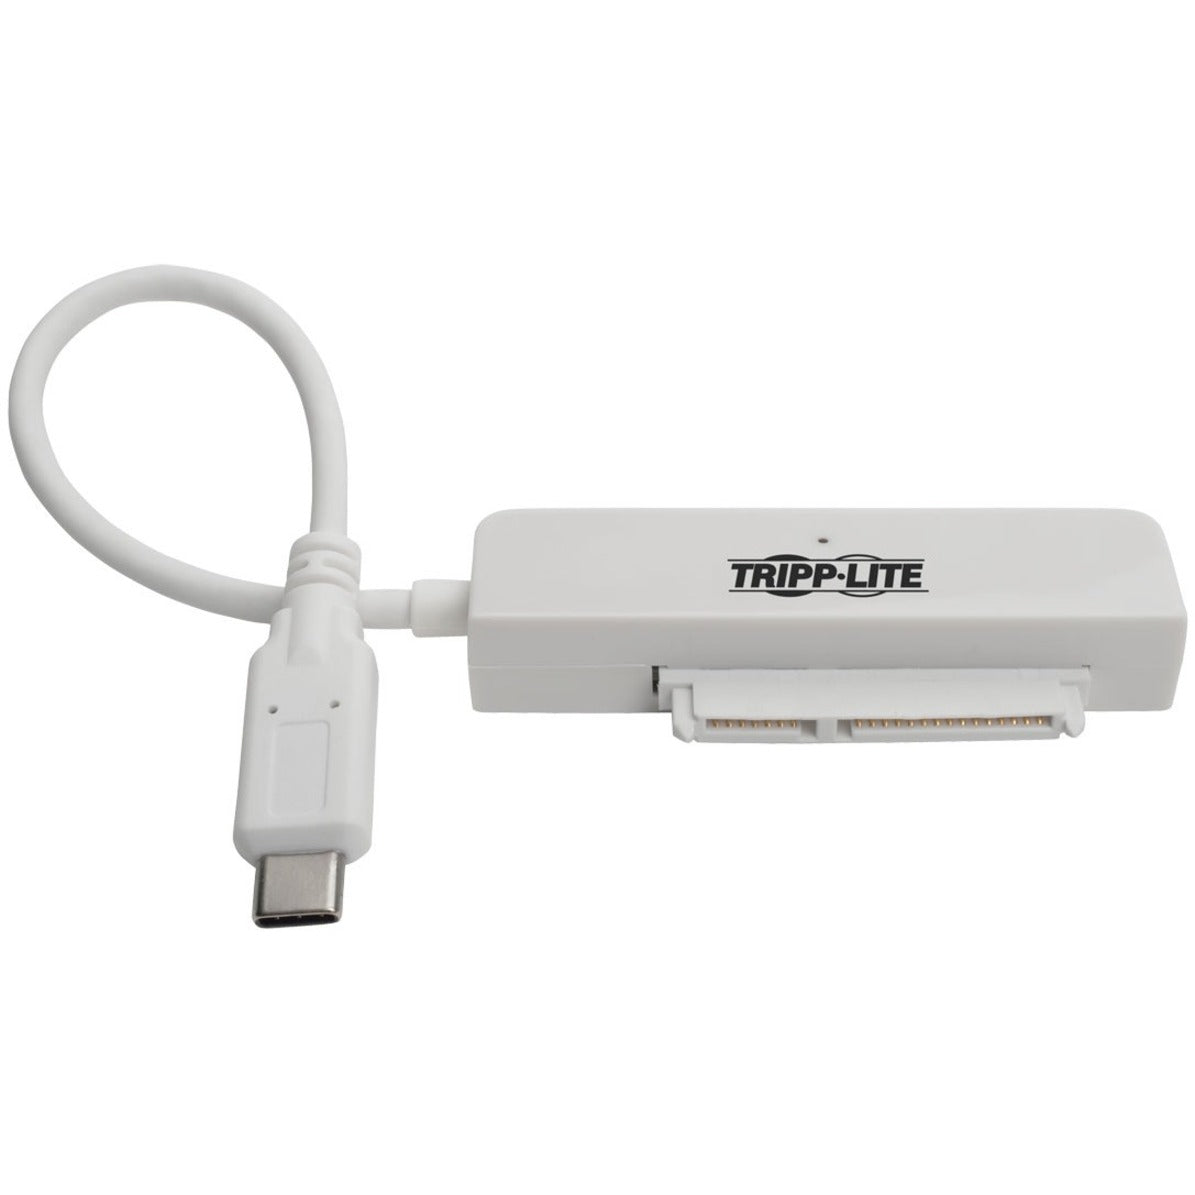 Tripp Lite by Eaton U438-06N-G1-W USB 3.1 Gen 1 to SATA III Adapter Cable, White